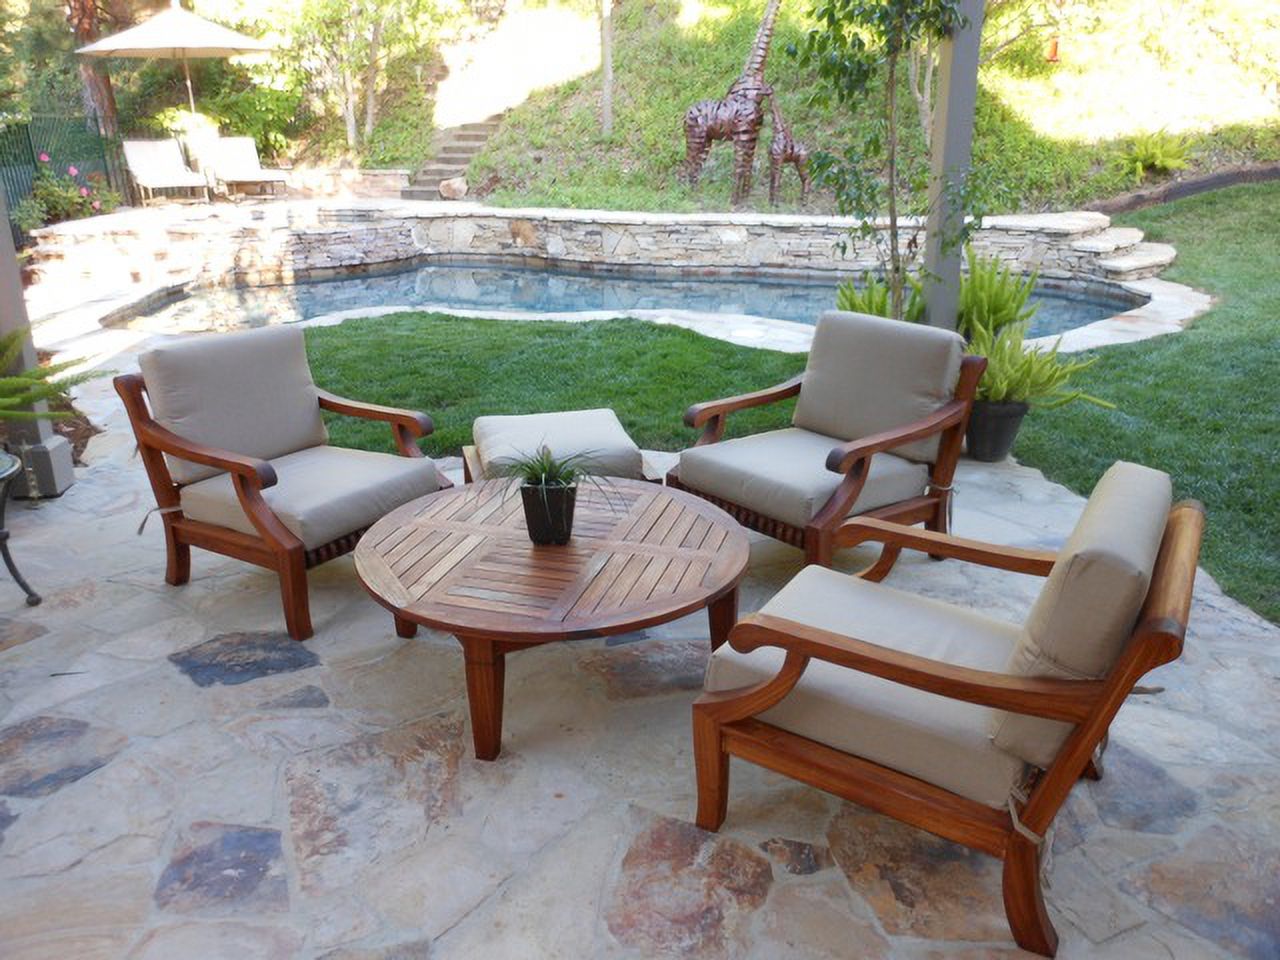 WholesaleTeak Outdoor Patio Grade-A Teak Wood 5 Piece Teak Sofa Set - 4 Lounge Chairs & 1 Round Coffee Table -Furniture only --Giva Collection #WMSSGV4 - image 5 of 5